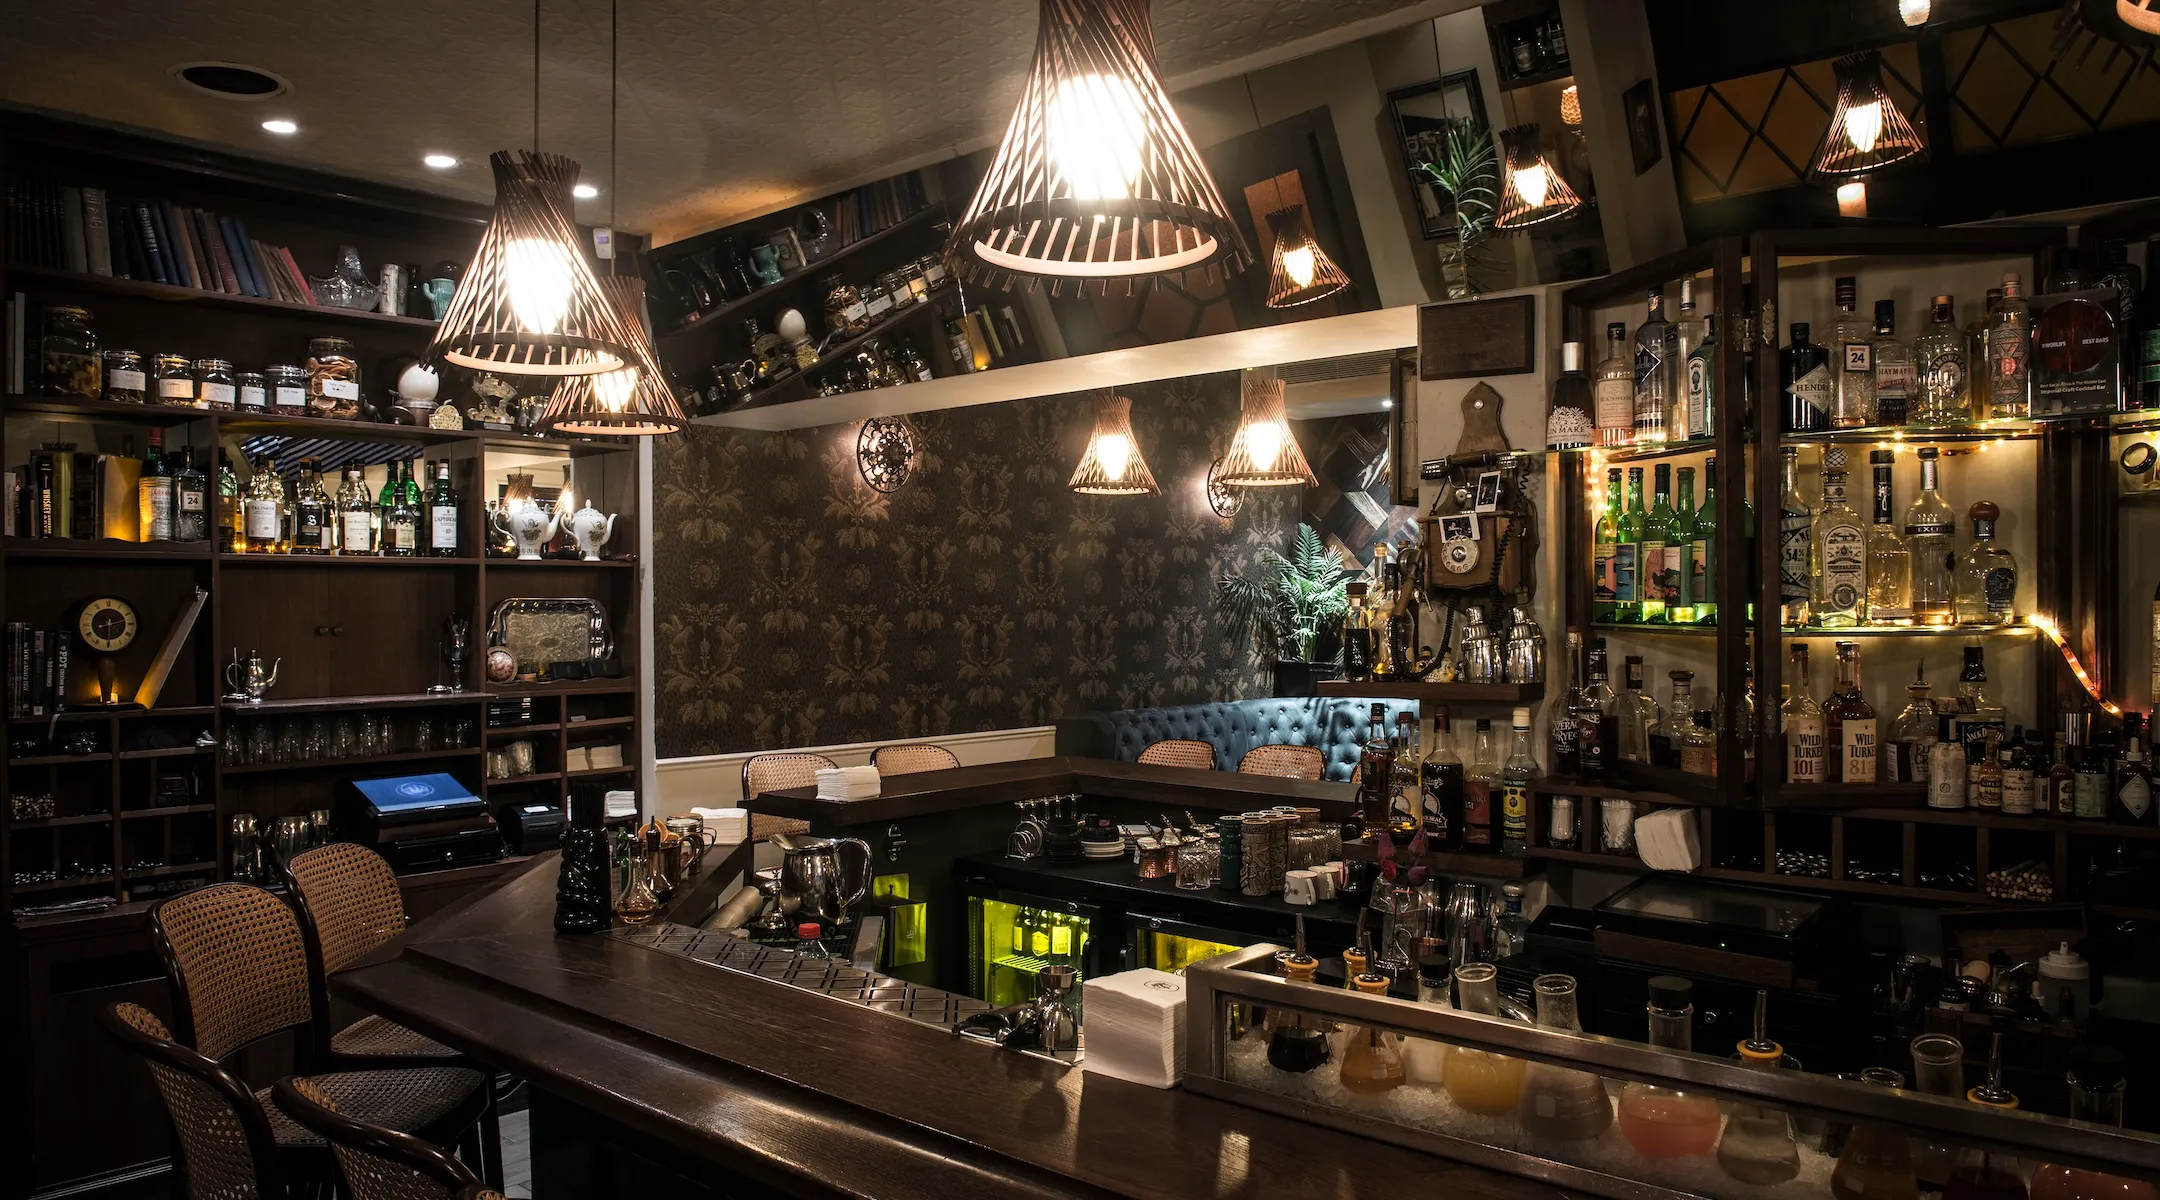 Imperial Cocktail Bar in Israel, Middle East | Bars - Rated 4.1